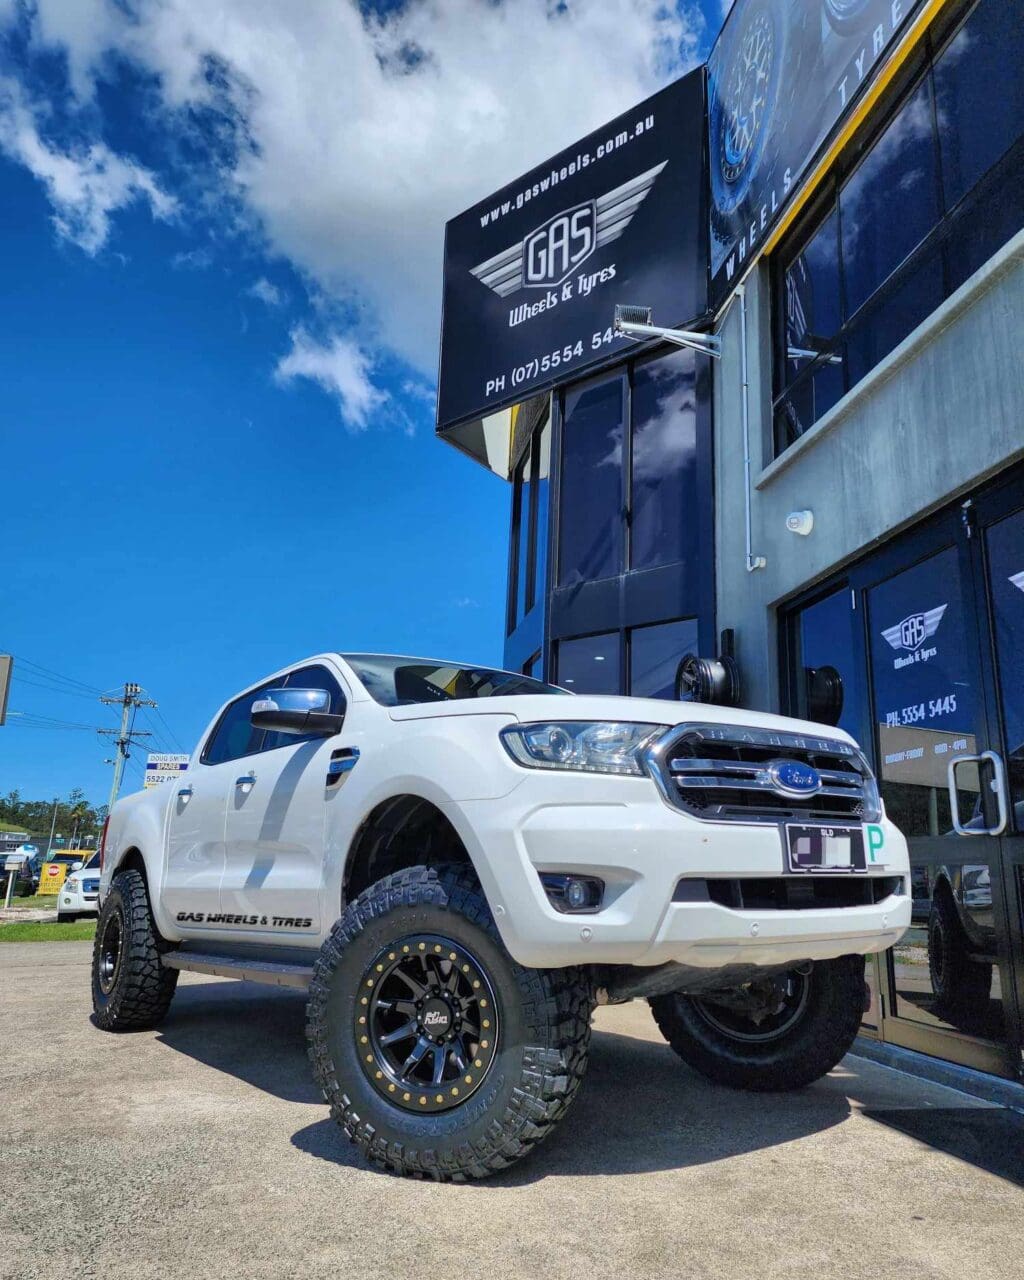 Dirty Life DT-2 Ford Ranger by Gas Wheels